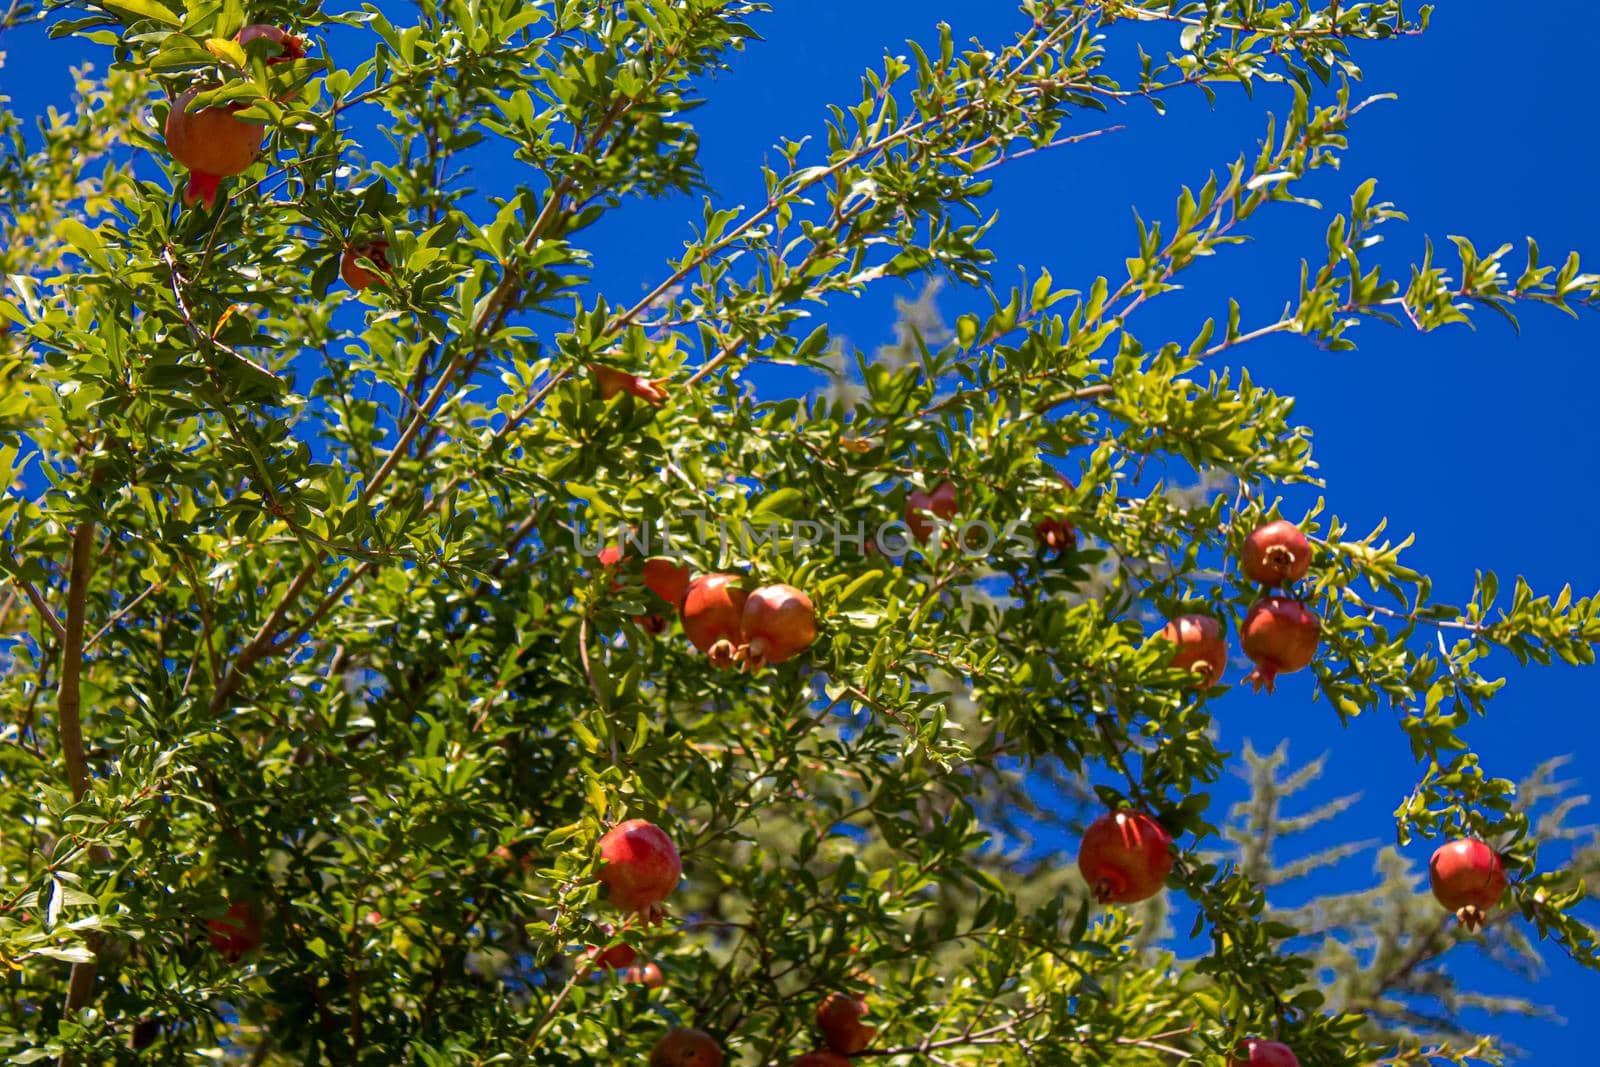 pomegranate on tree in a farm garden.selectiv focus.nature